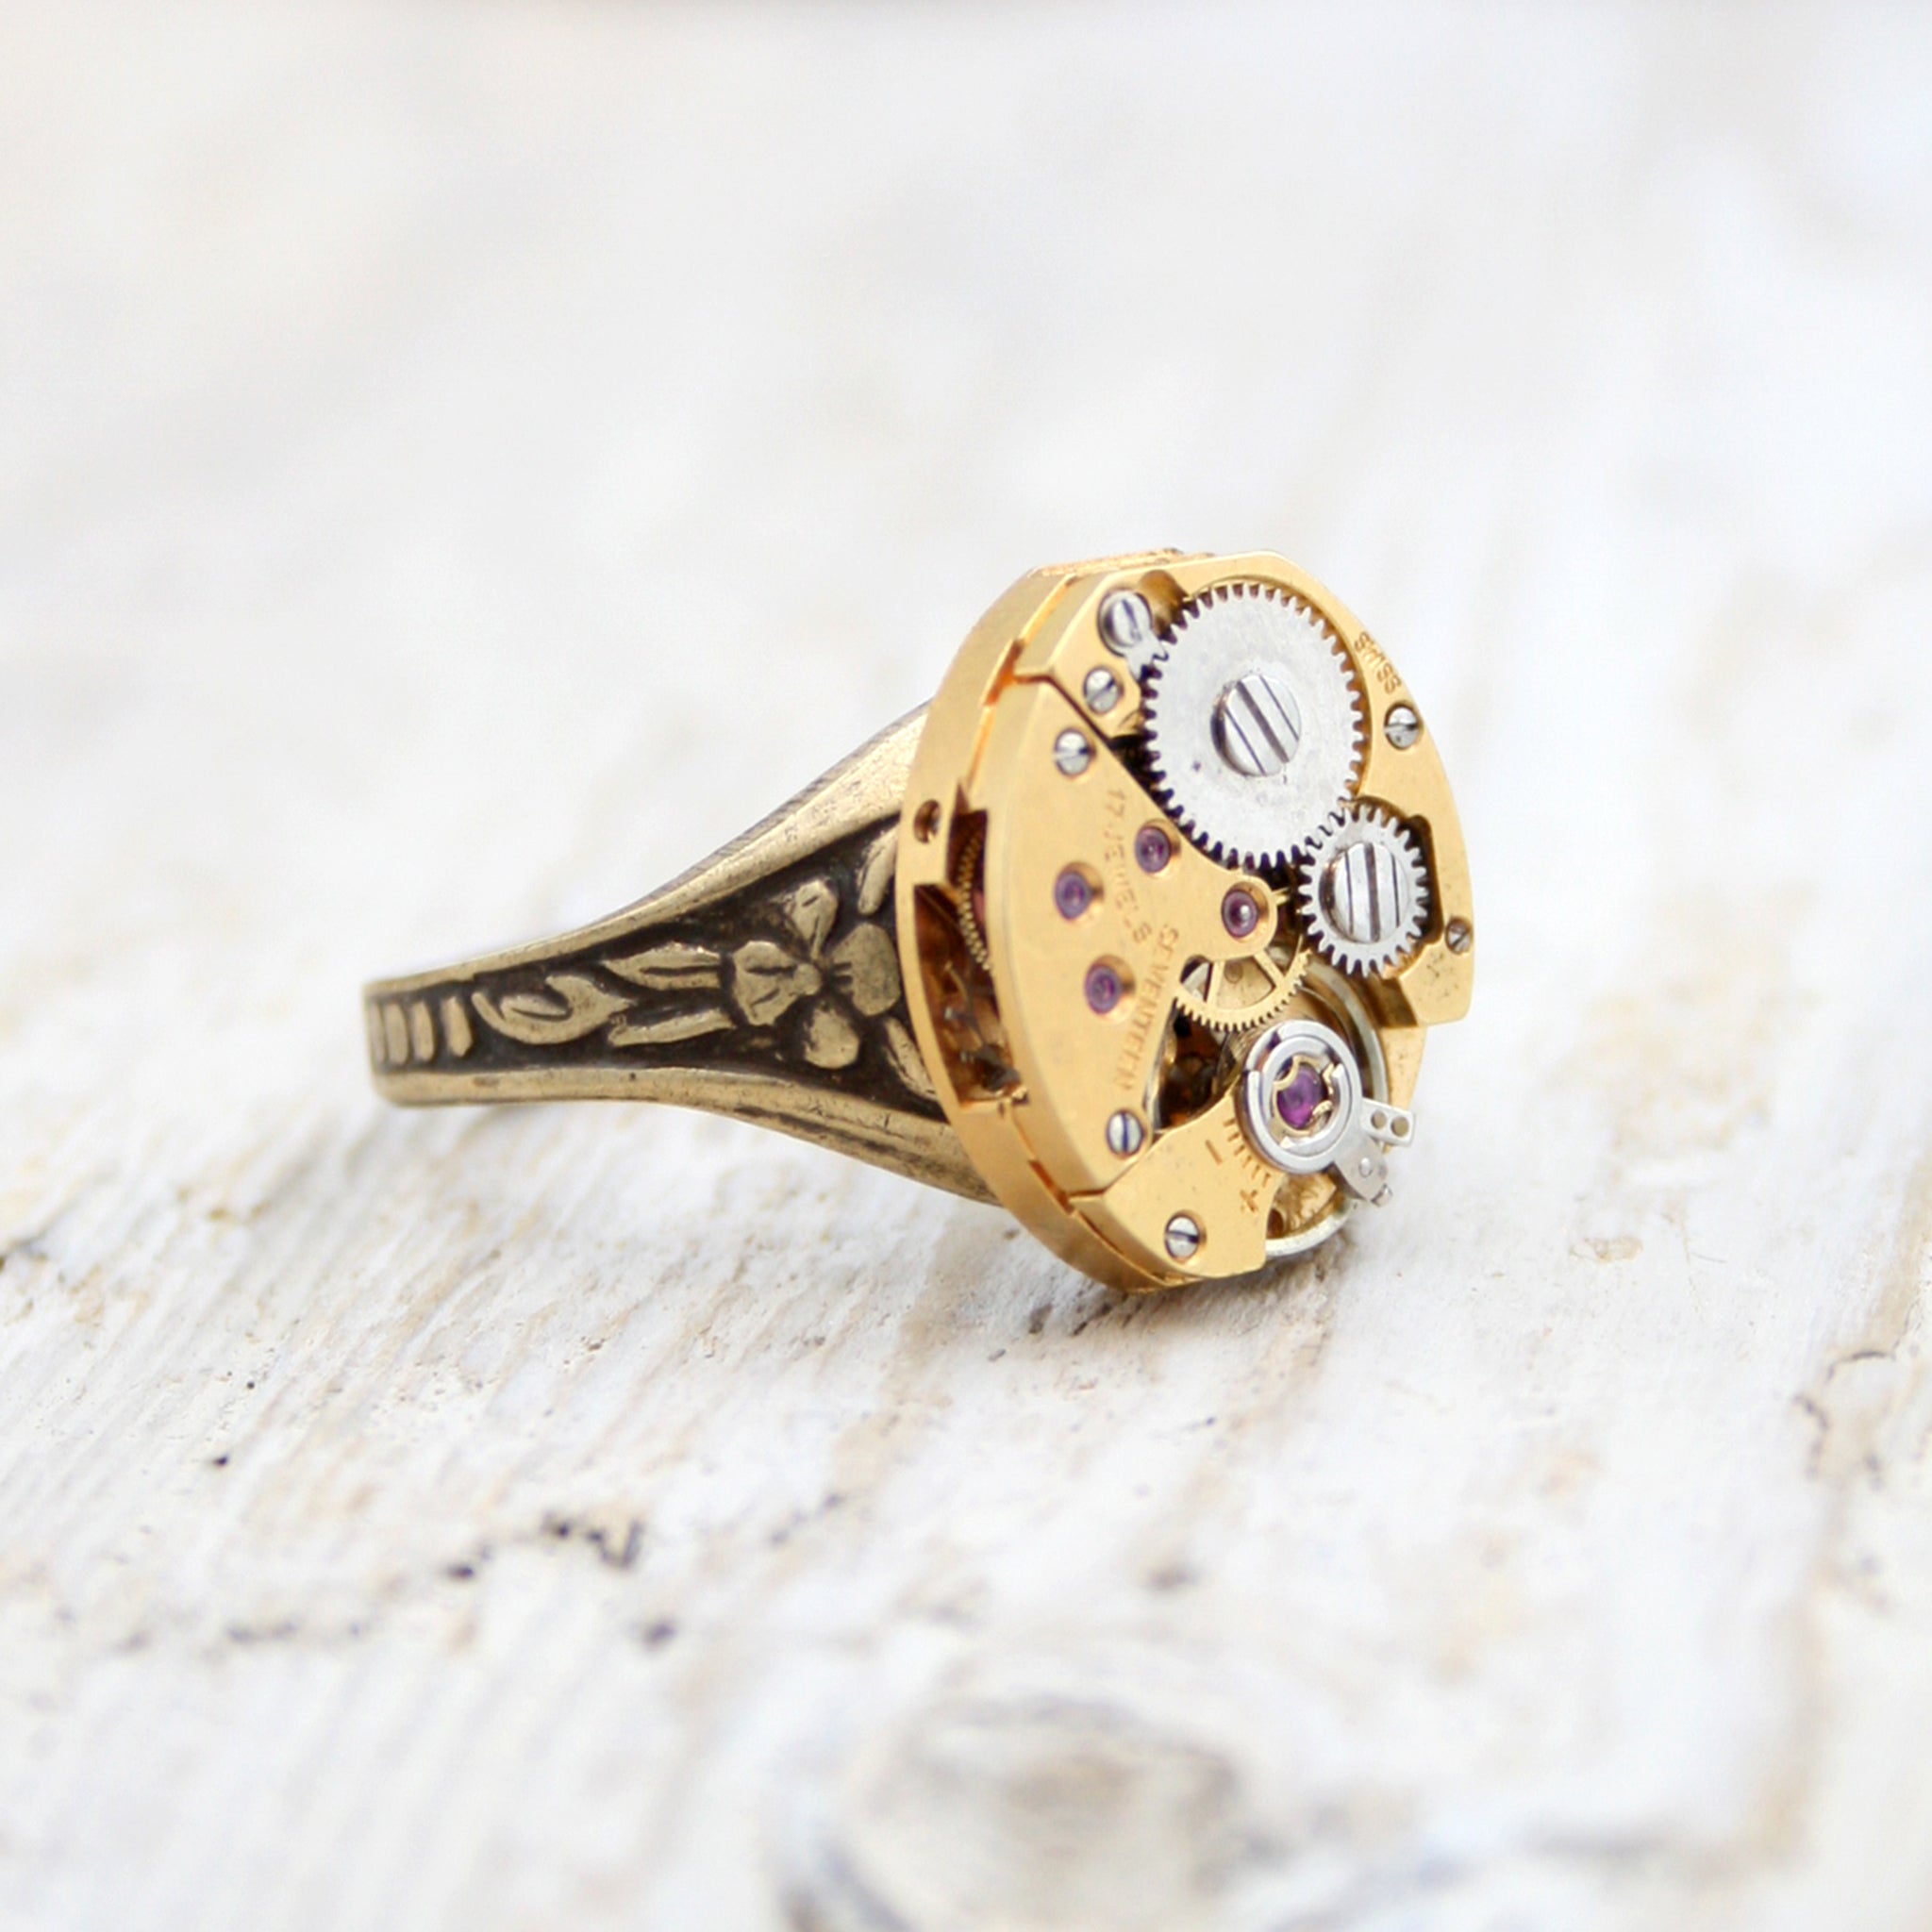 Gold Signet Pinky Ring in steampunk style made of watch inside